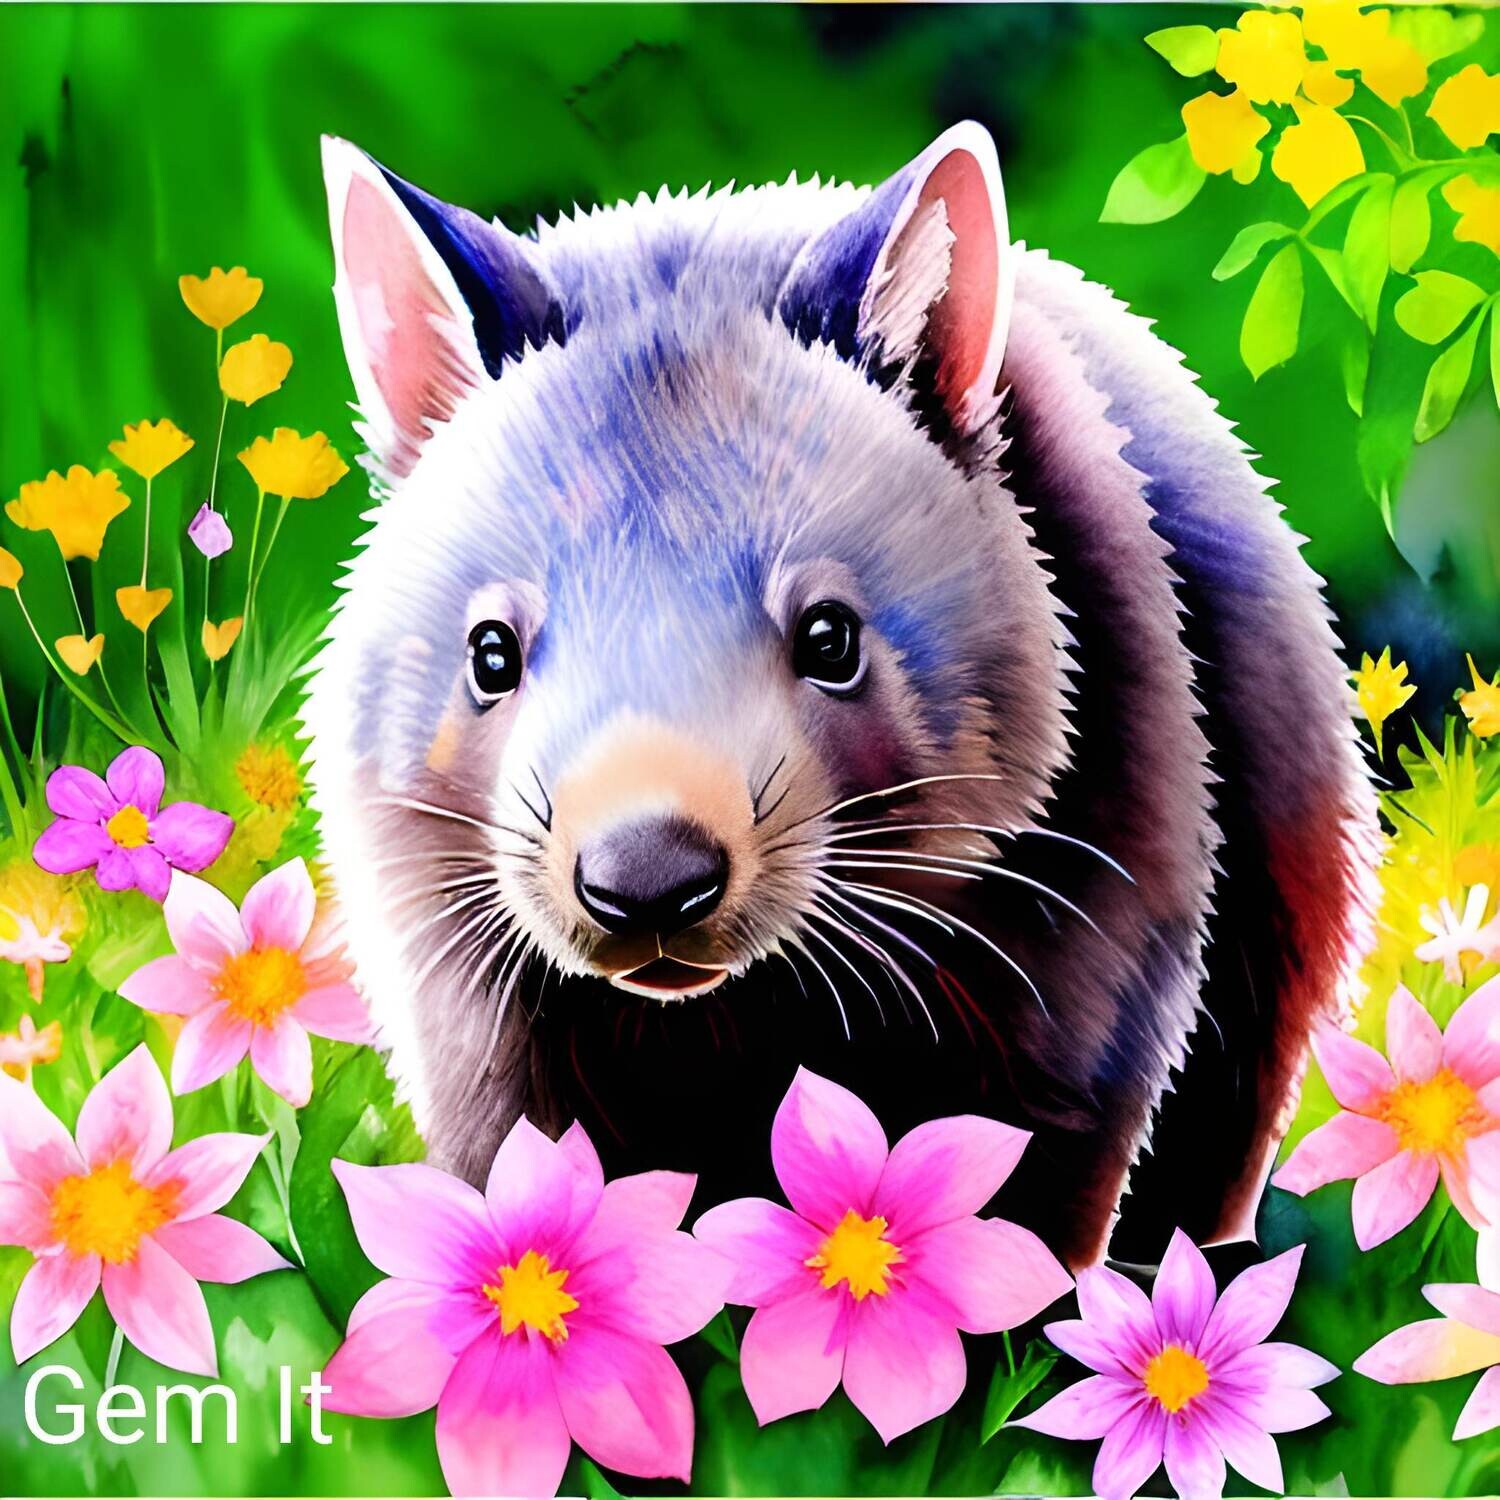 Wombat 2 - Full Drill Diamond Painting - Specially ordered for you. Delivery is approximately 4 - 6 weeks.